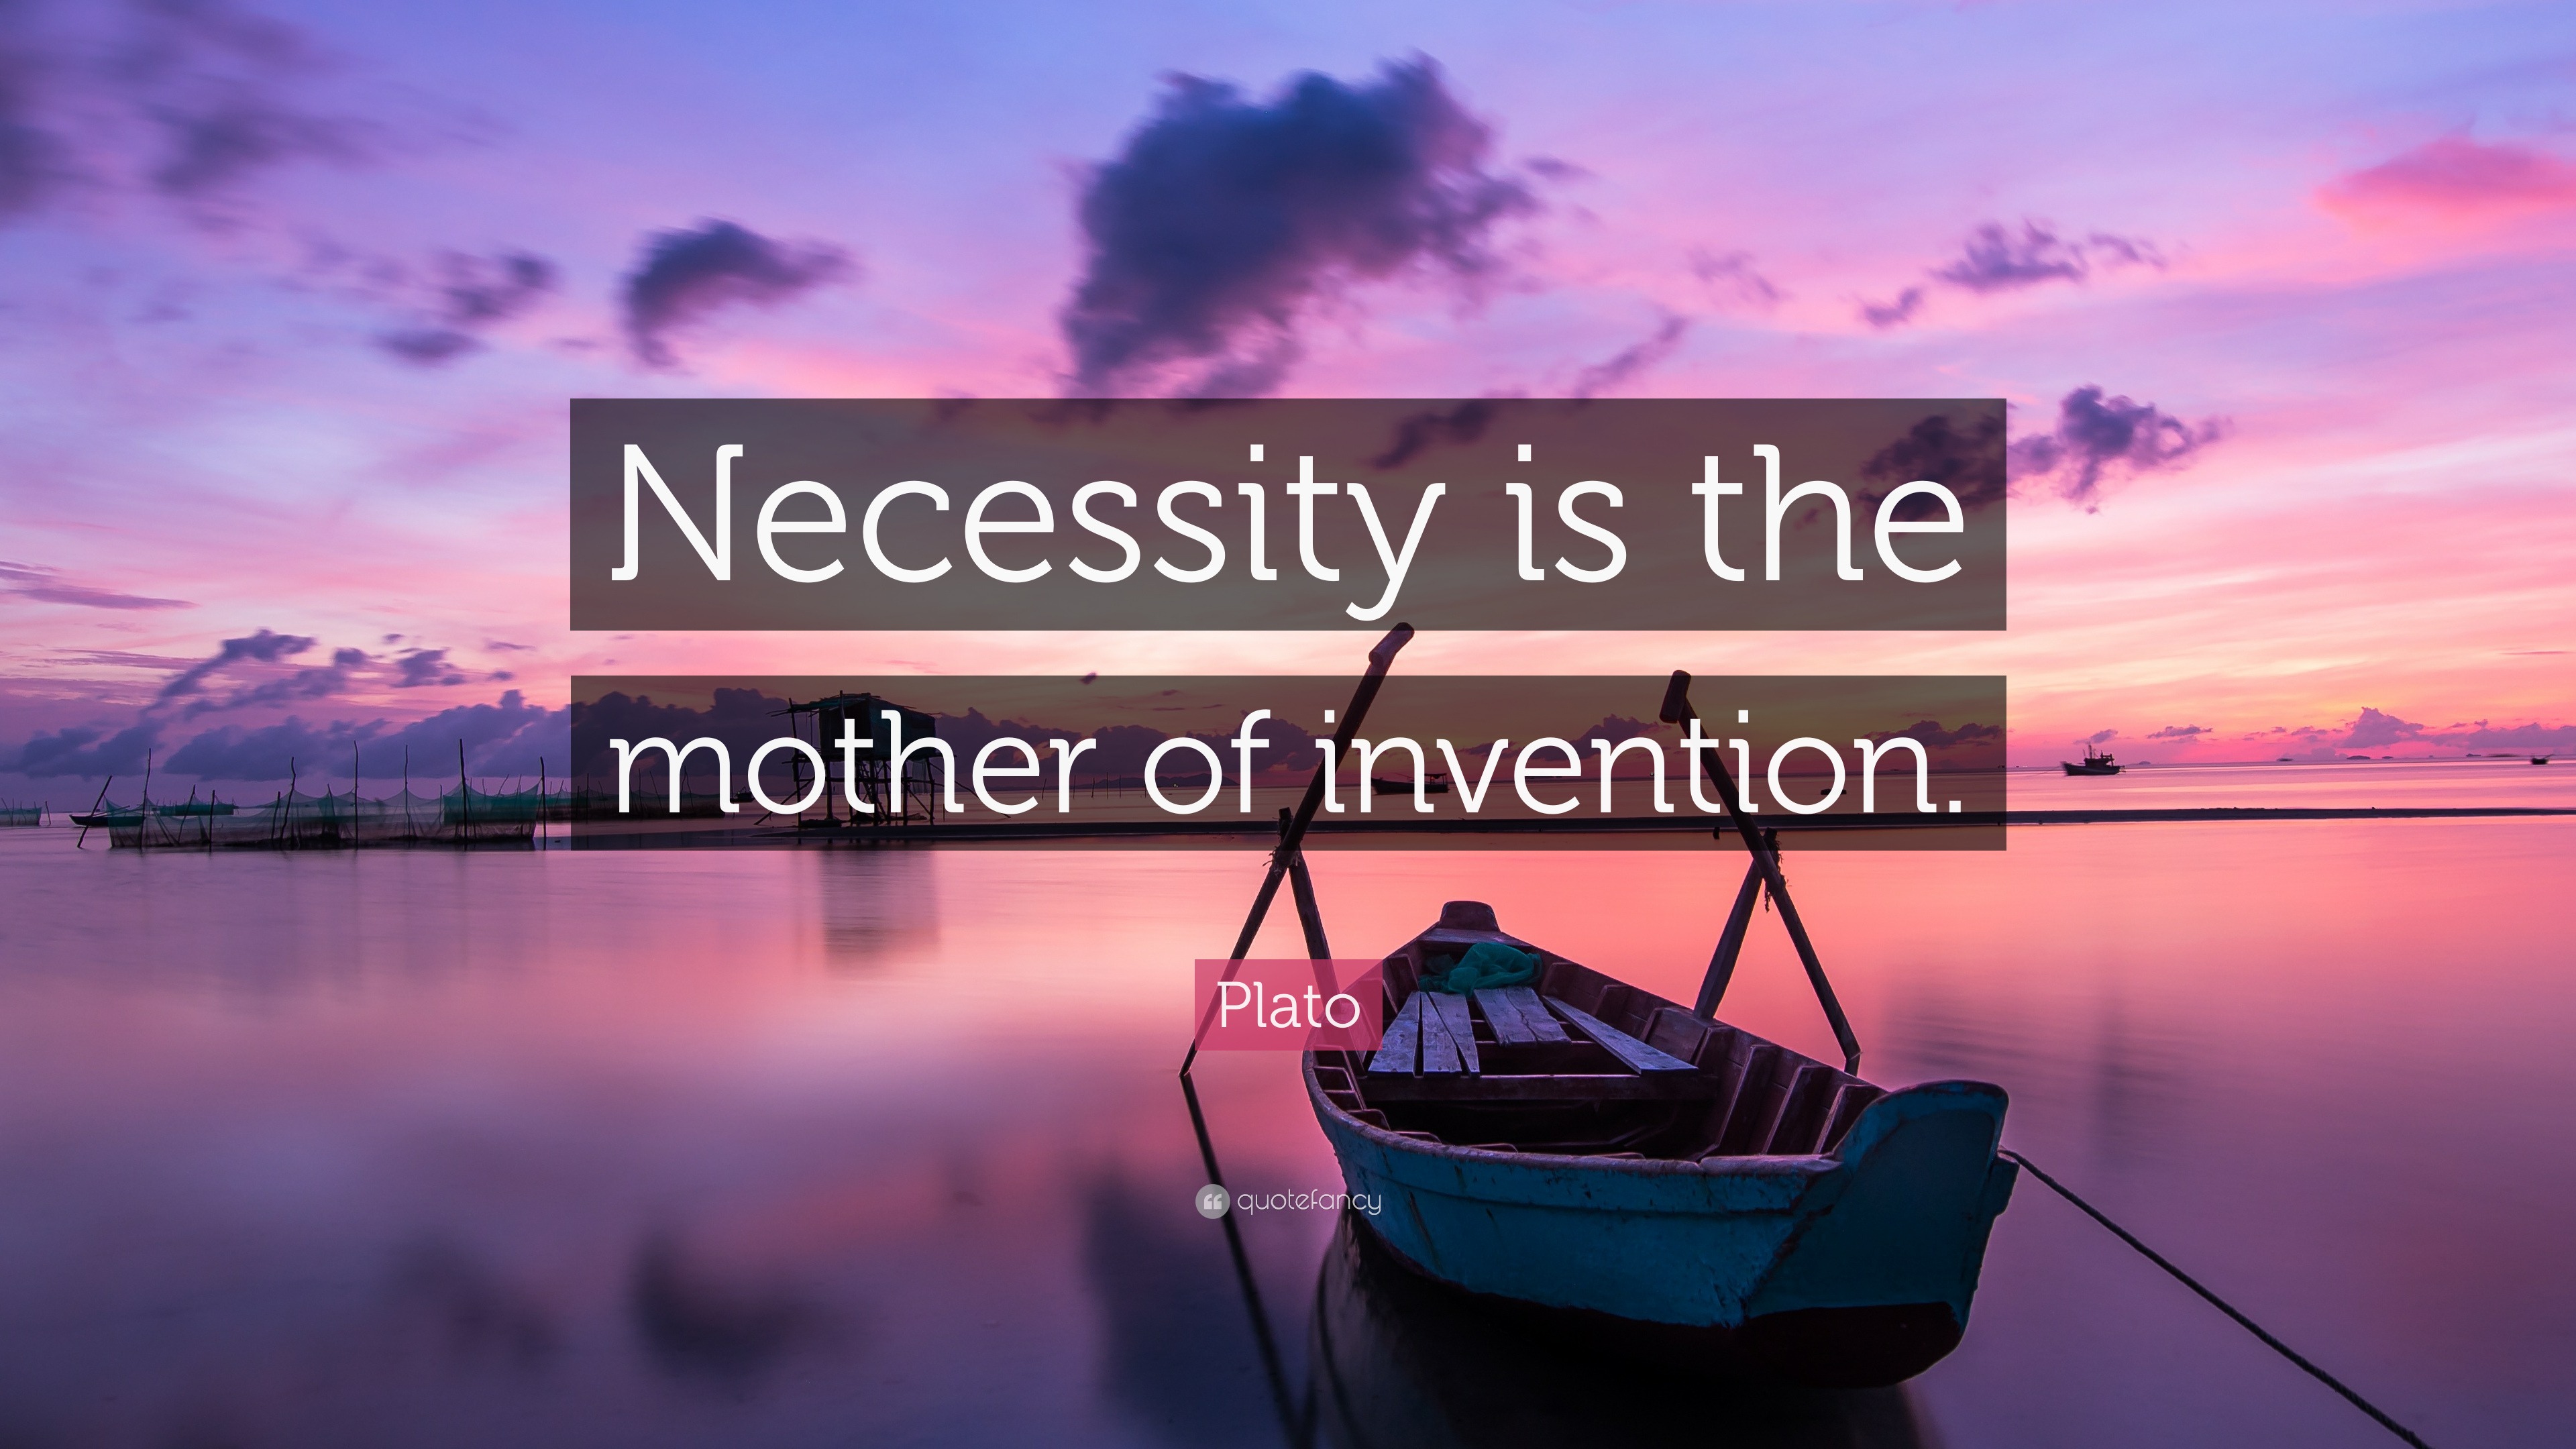 essay about necessity is the mother of invention